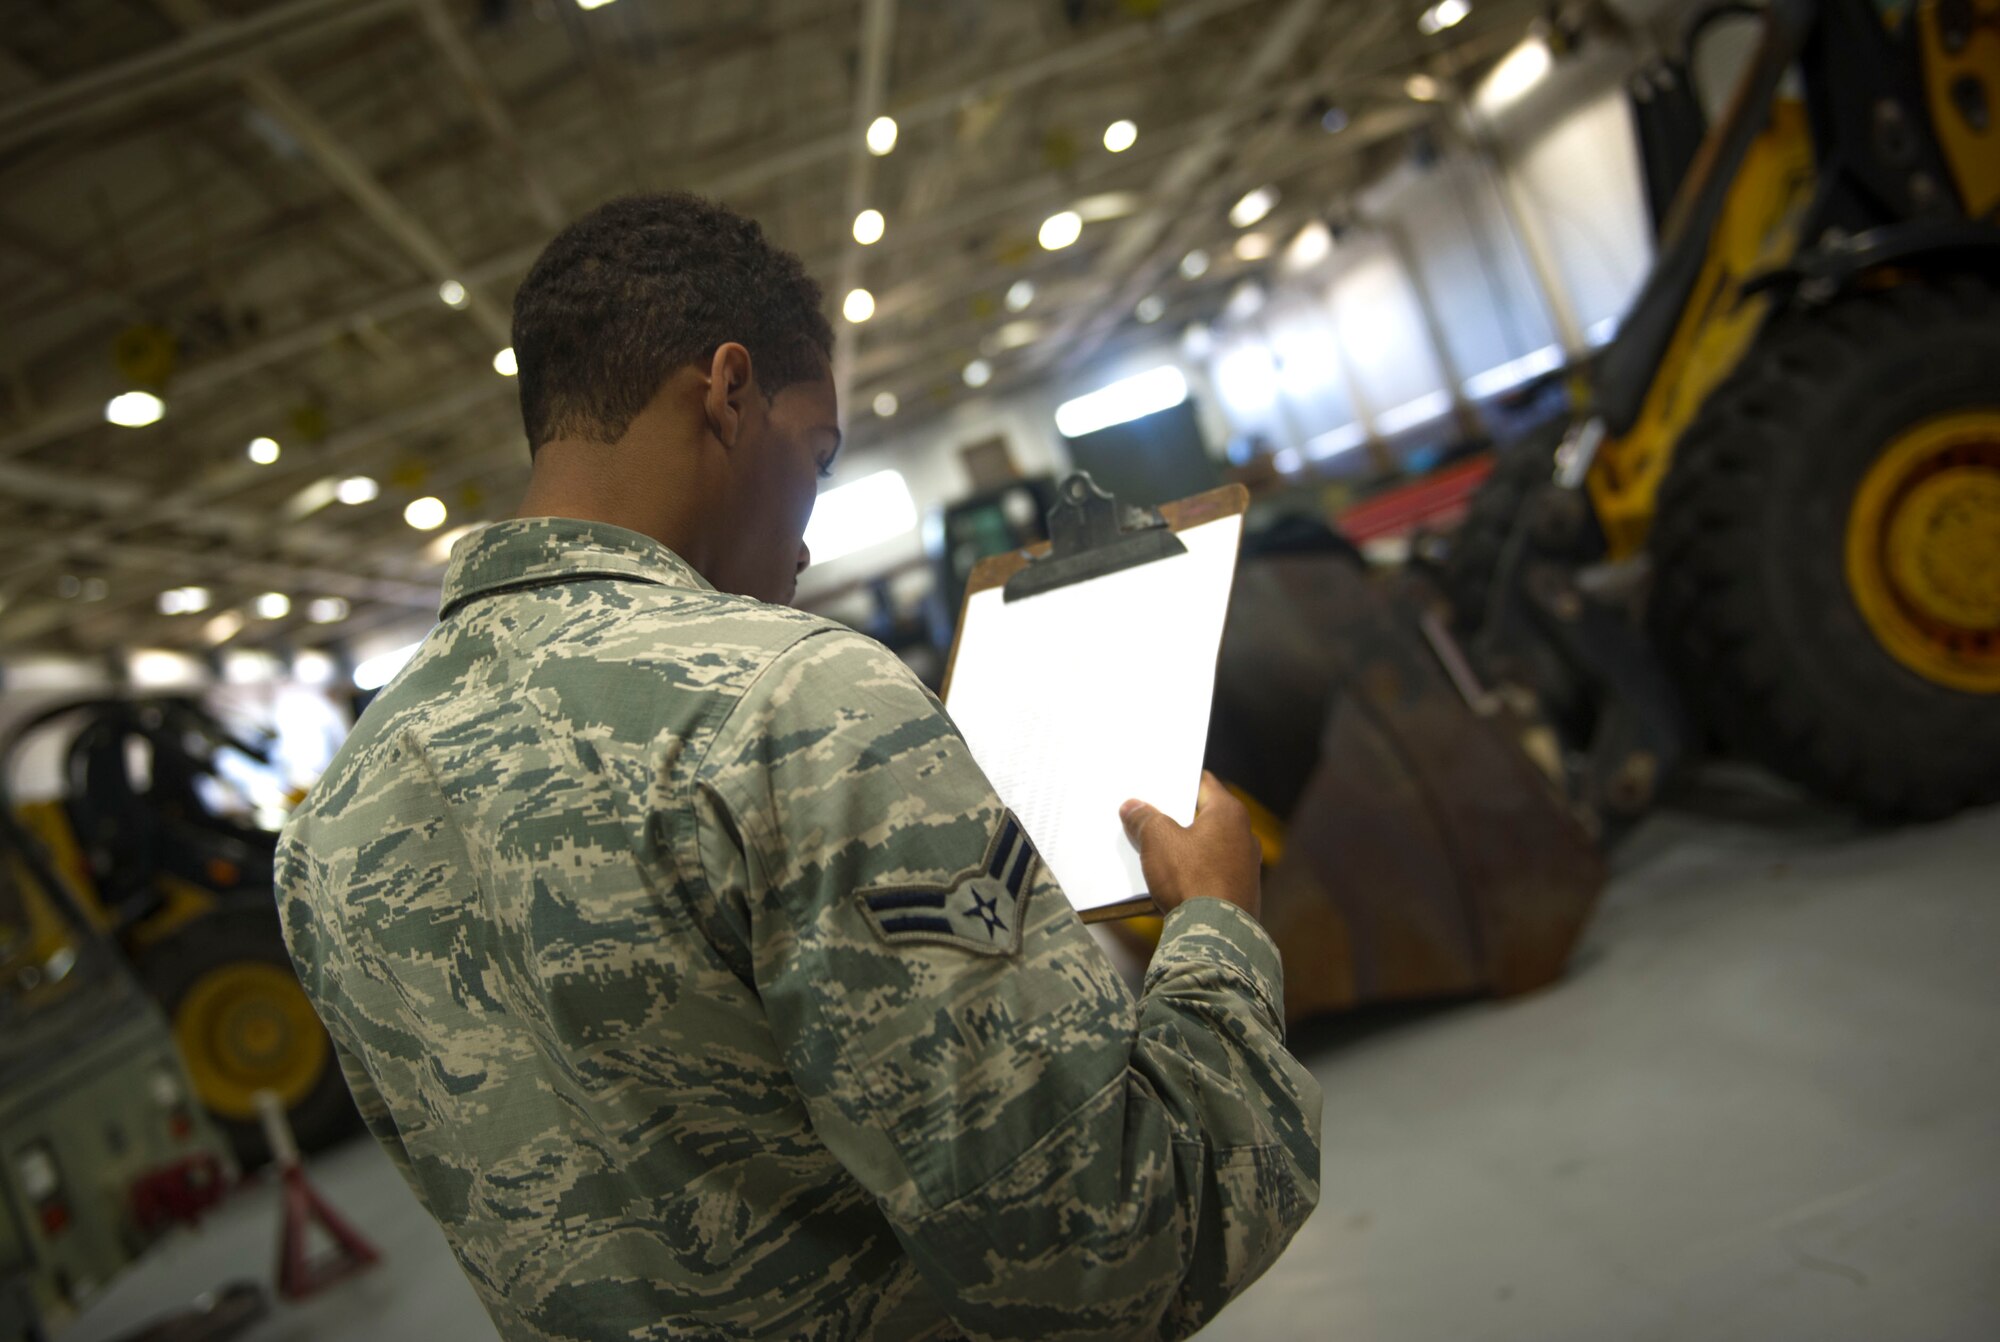 Airman 1st Class Jordan Artis, a vehicle management analysis journeyman with the 1st Special Operations Logistics Readiness Squadron, performs a yard check on Hurlburt Field, Fla., Jan. 12, 2016. A yard check is conducted to ensure all vehicles are accounted for. (U.S. Air Force photo by Senior Airman Krystal M. Garrett)